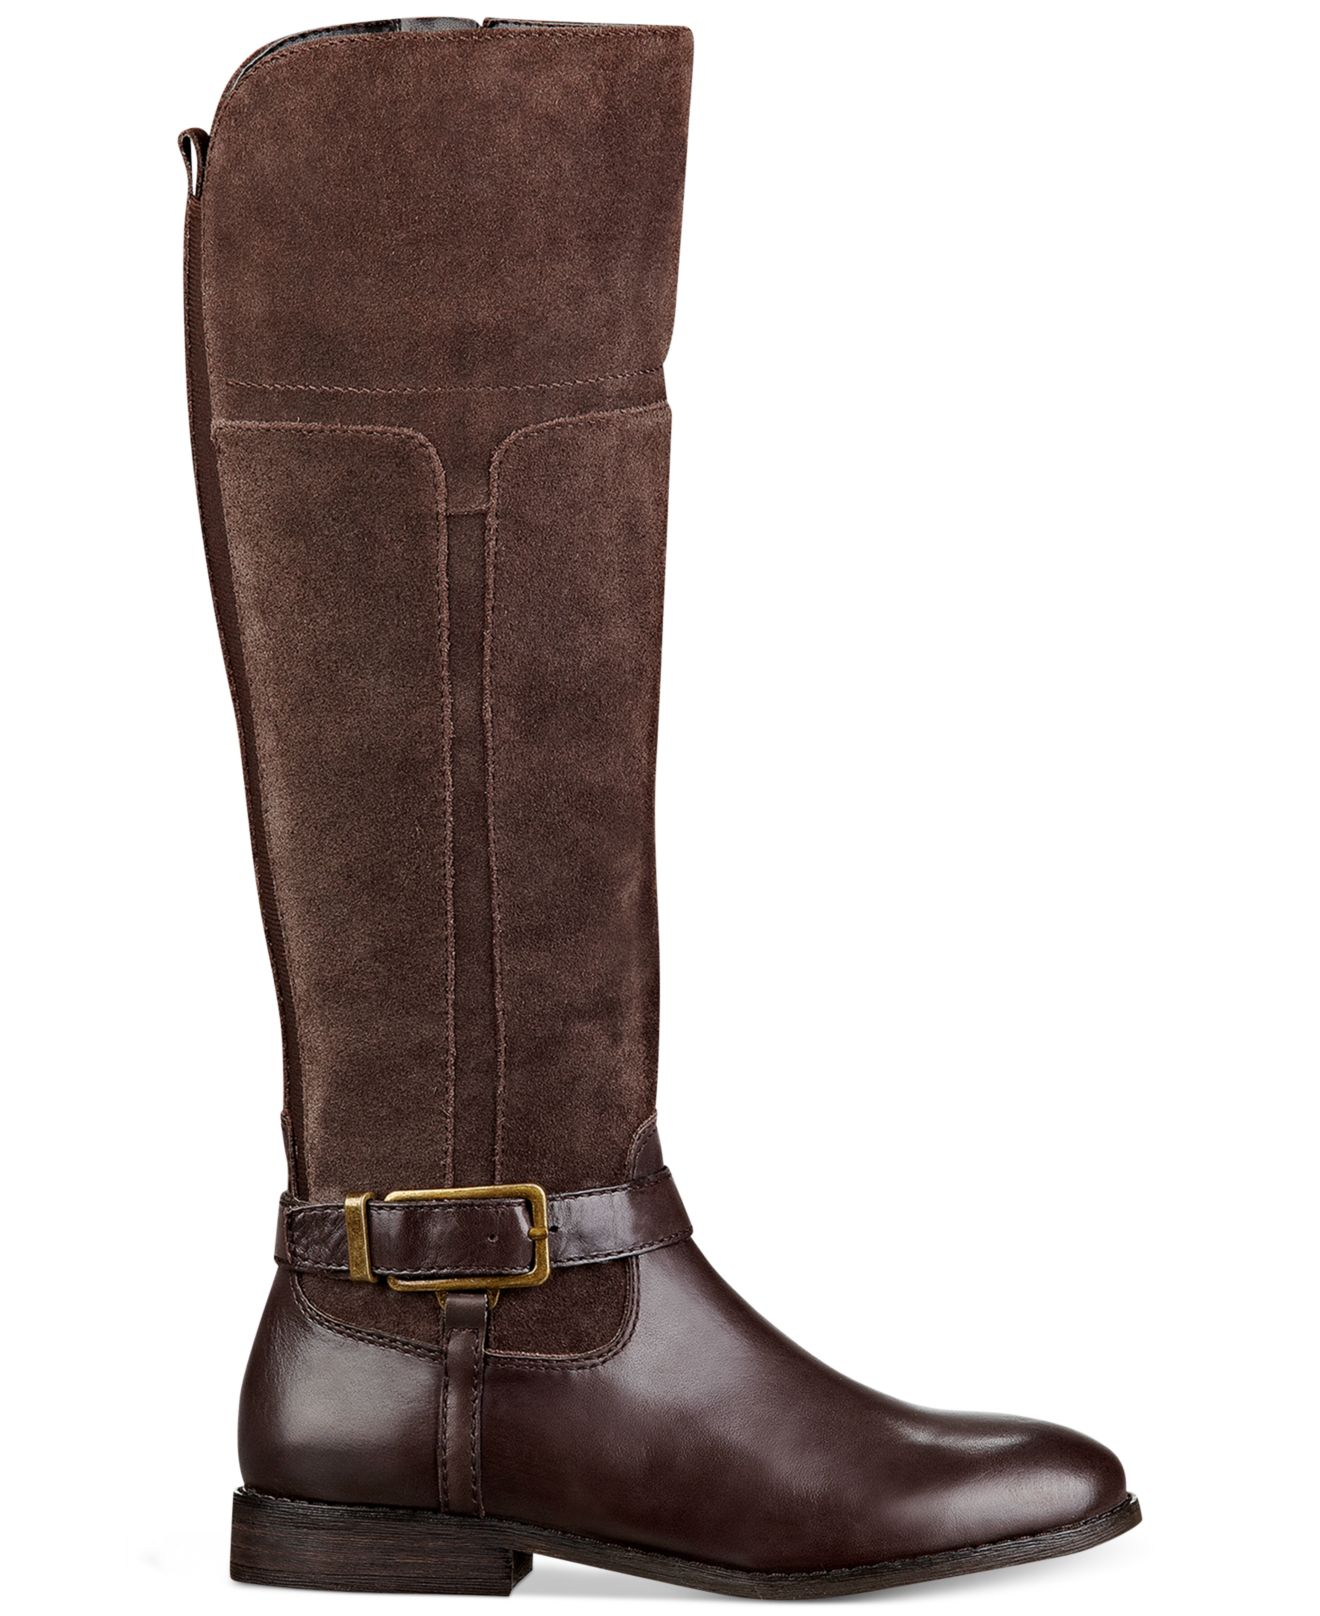 Lyst - Marc fisher Aysha Tall Wide Calf Riding Boots in Brown